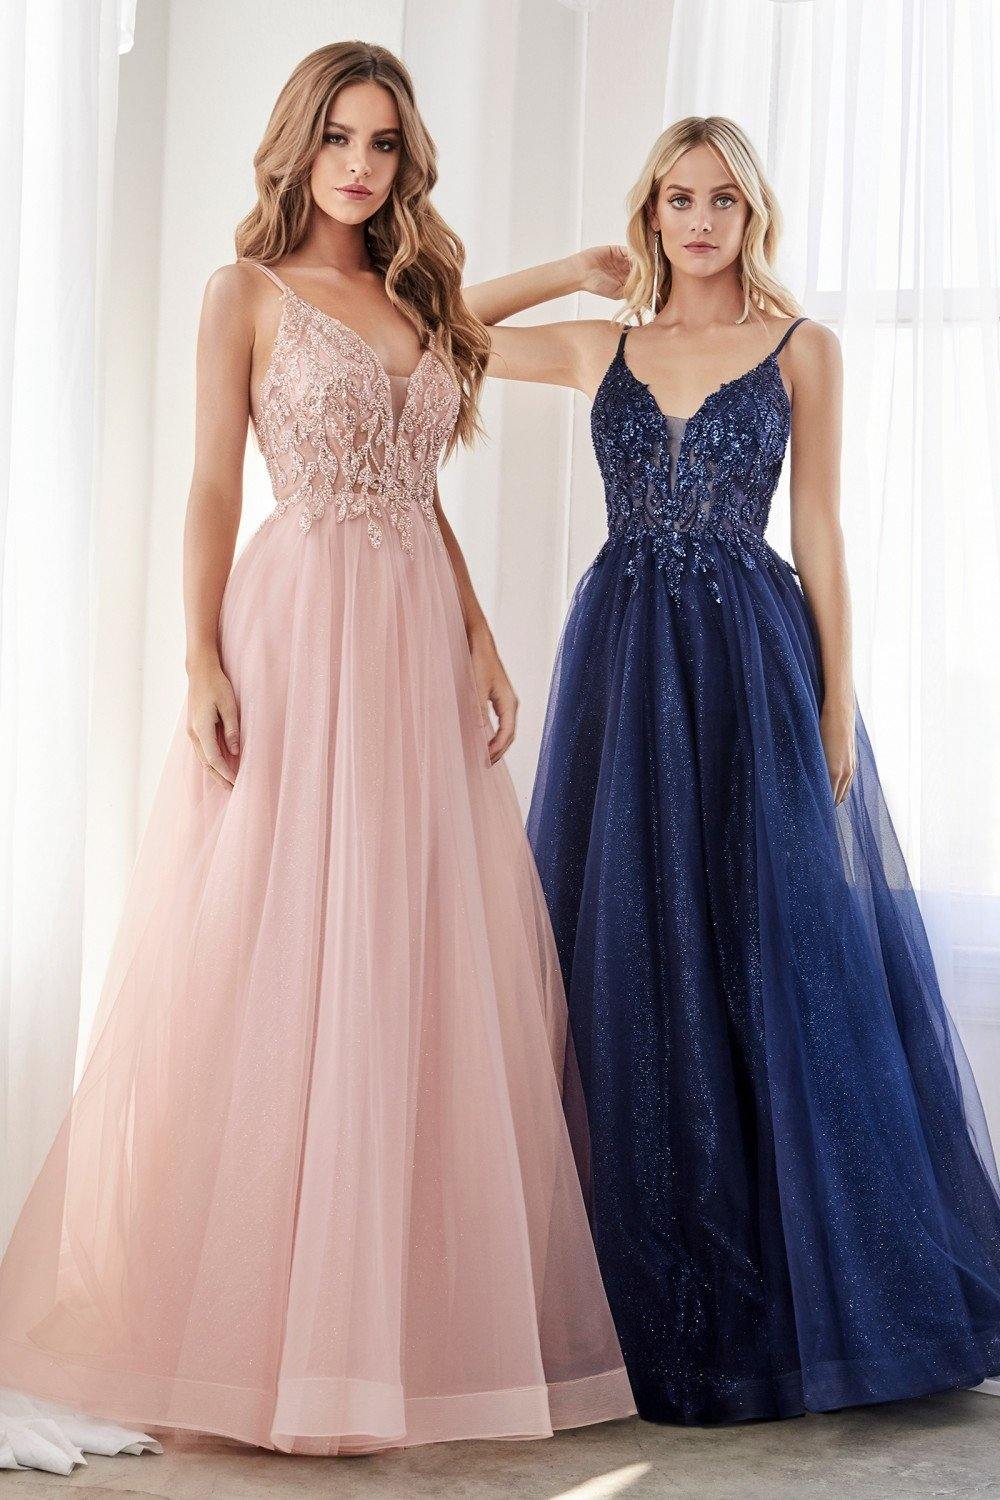 Long Formal Ball Gown Prom Dress - The Dress Outlet